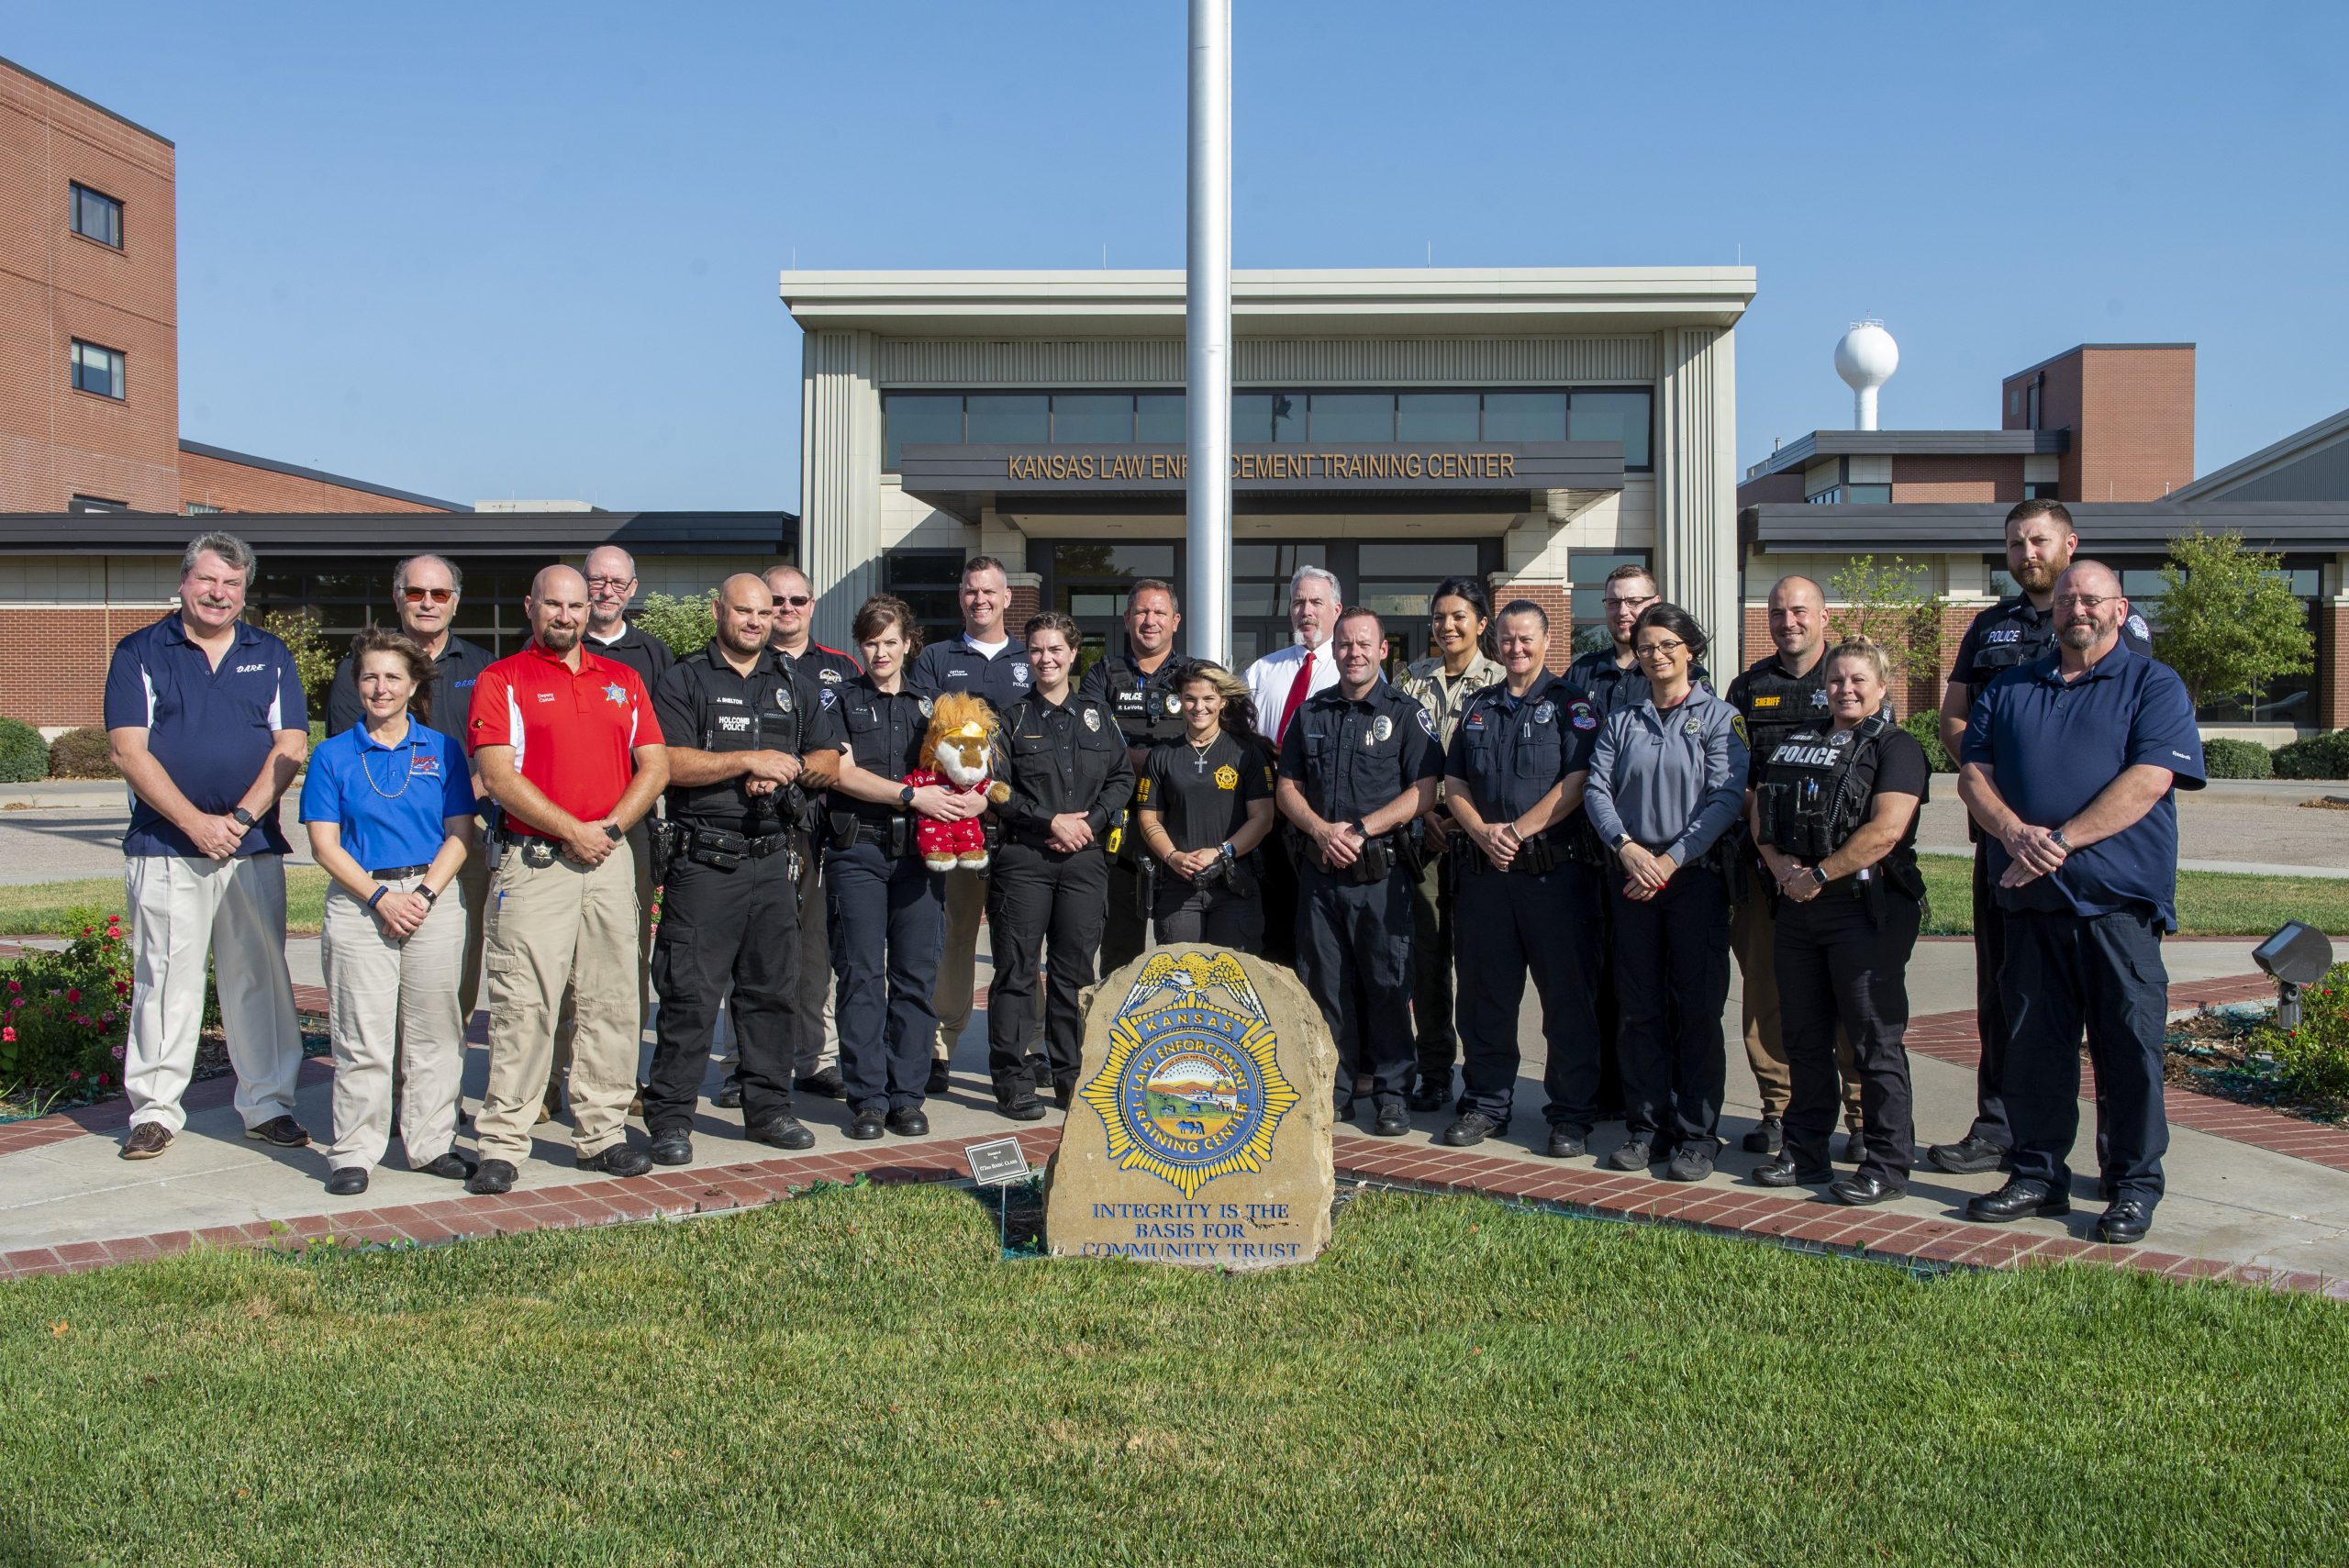 Class Photo from the D.A.R.E. Officer Training held on July 25 – Aug 5, 2022 in Hutchinson, KS